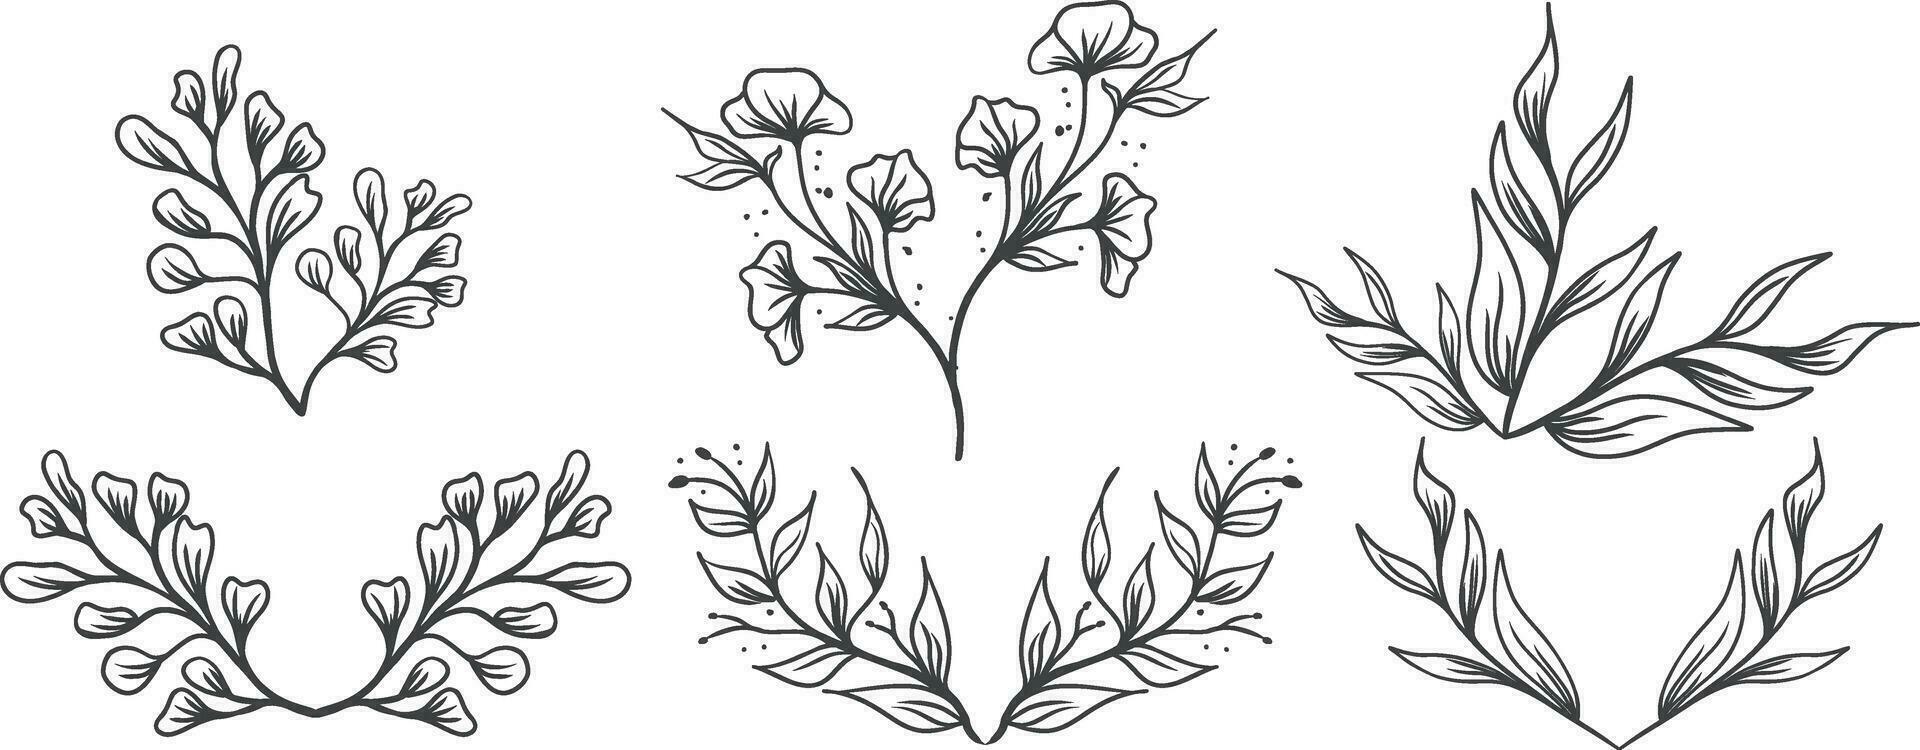 Set of floral elements, flower, leaves. Hand drawn sketch pencil style vector